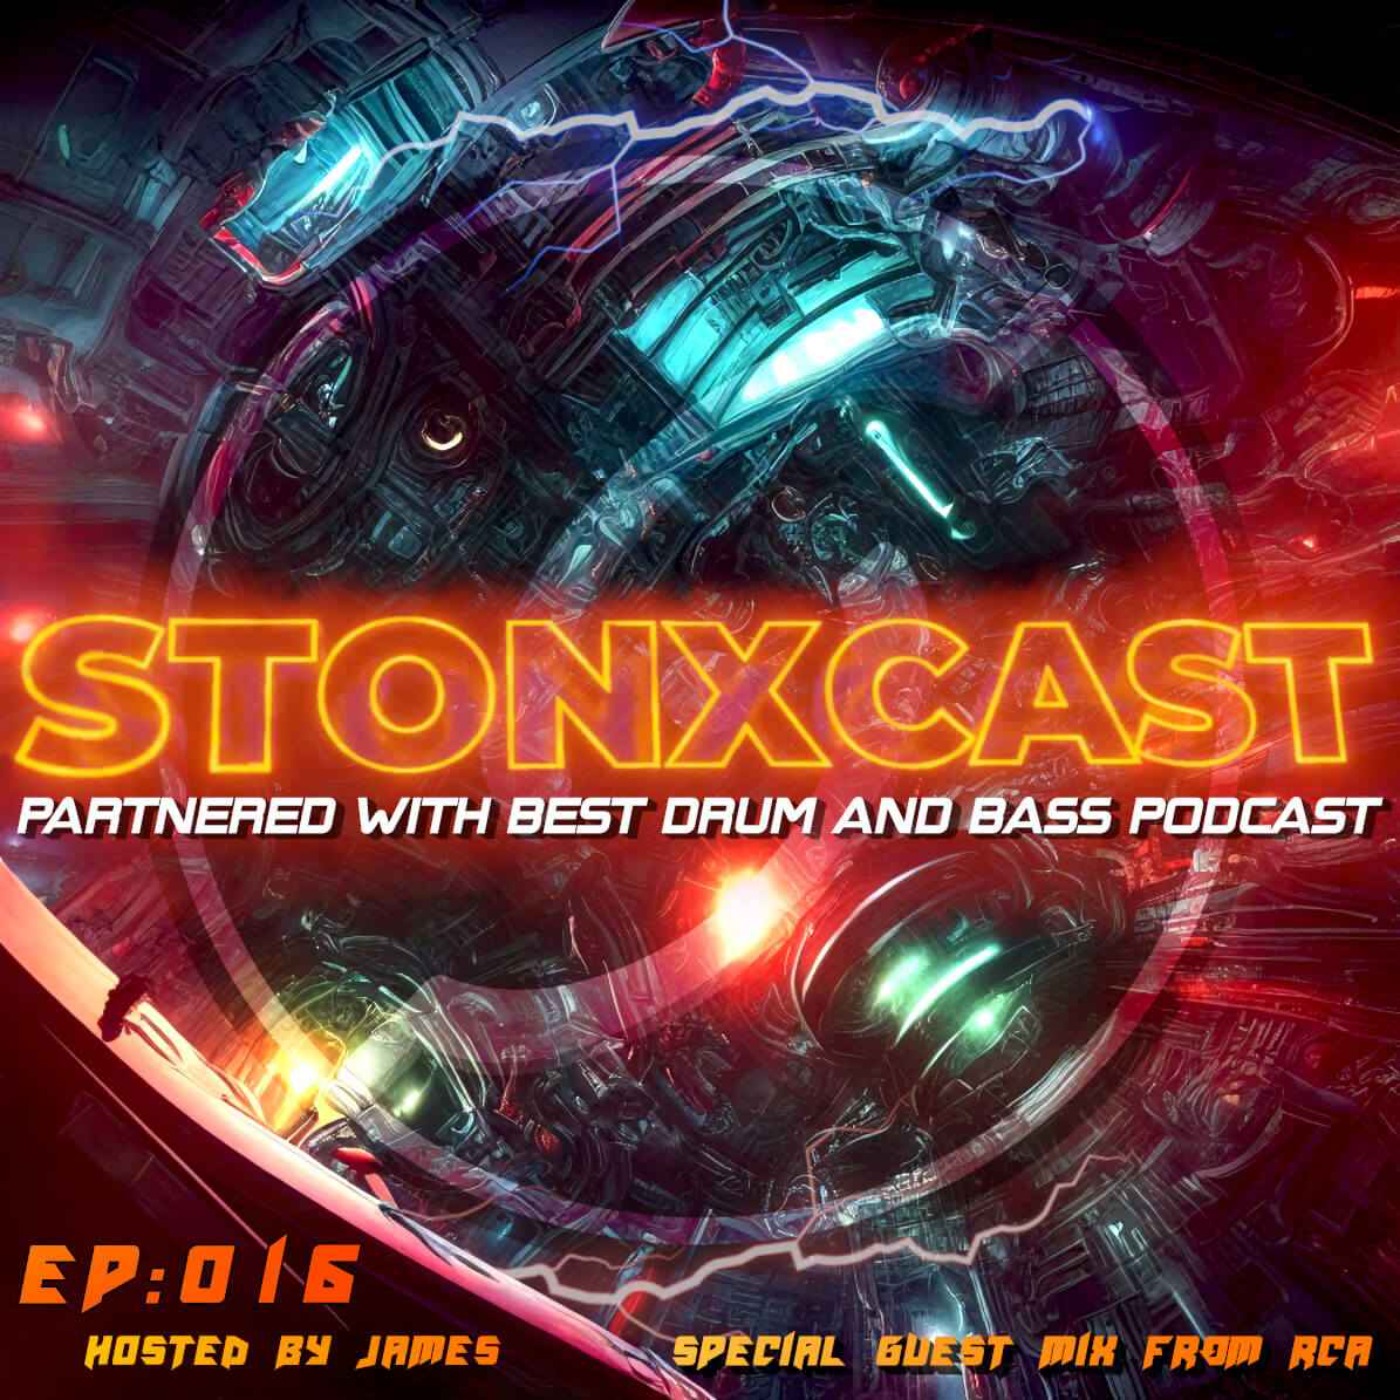 Stonxcast EP:016 - Hosted by James & RCA Artwork